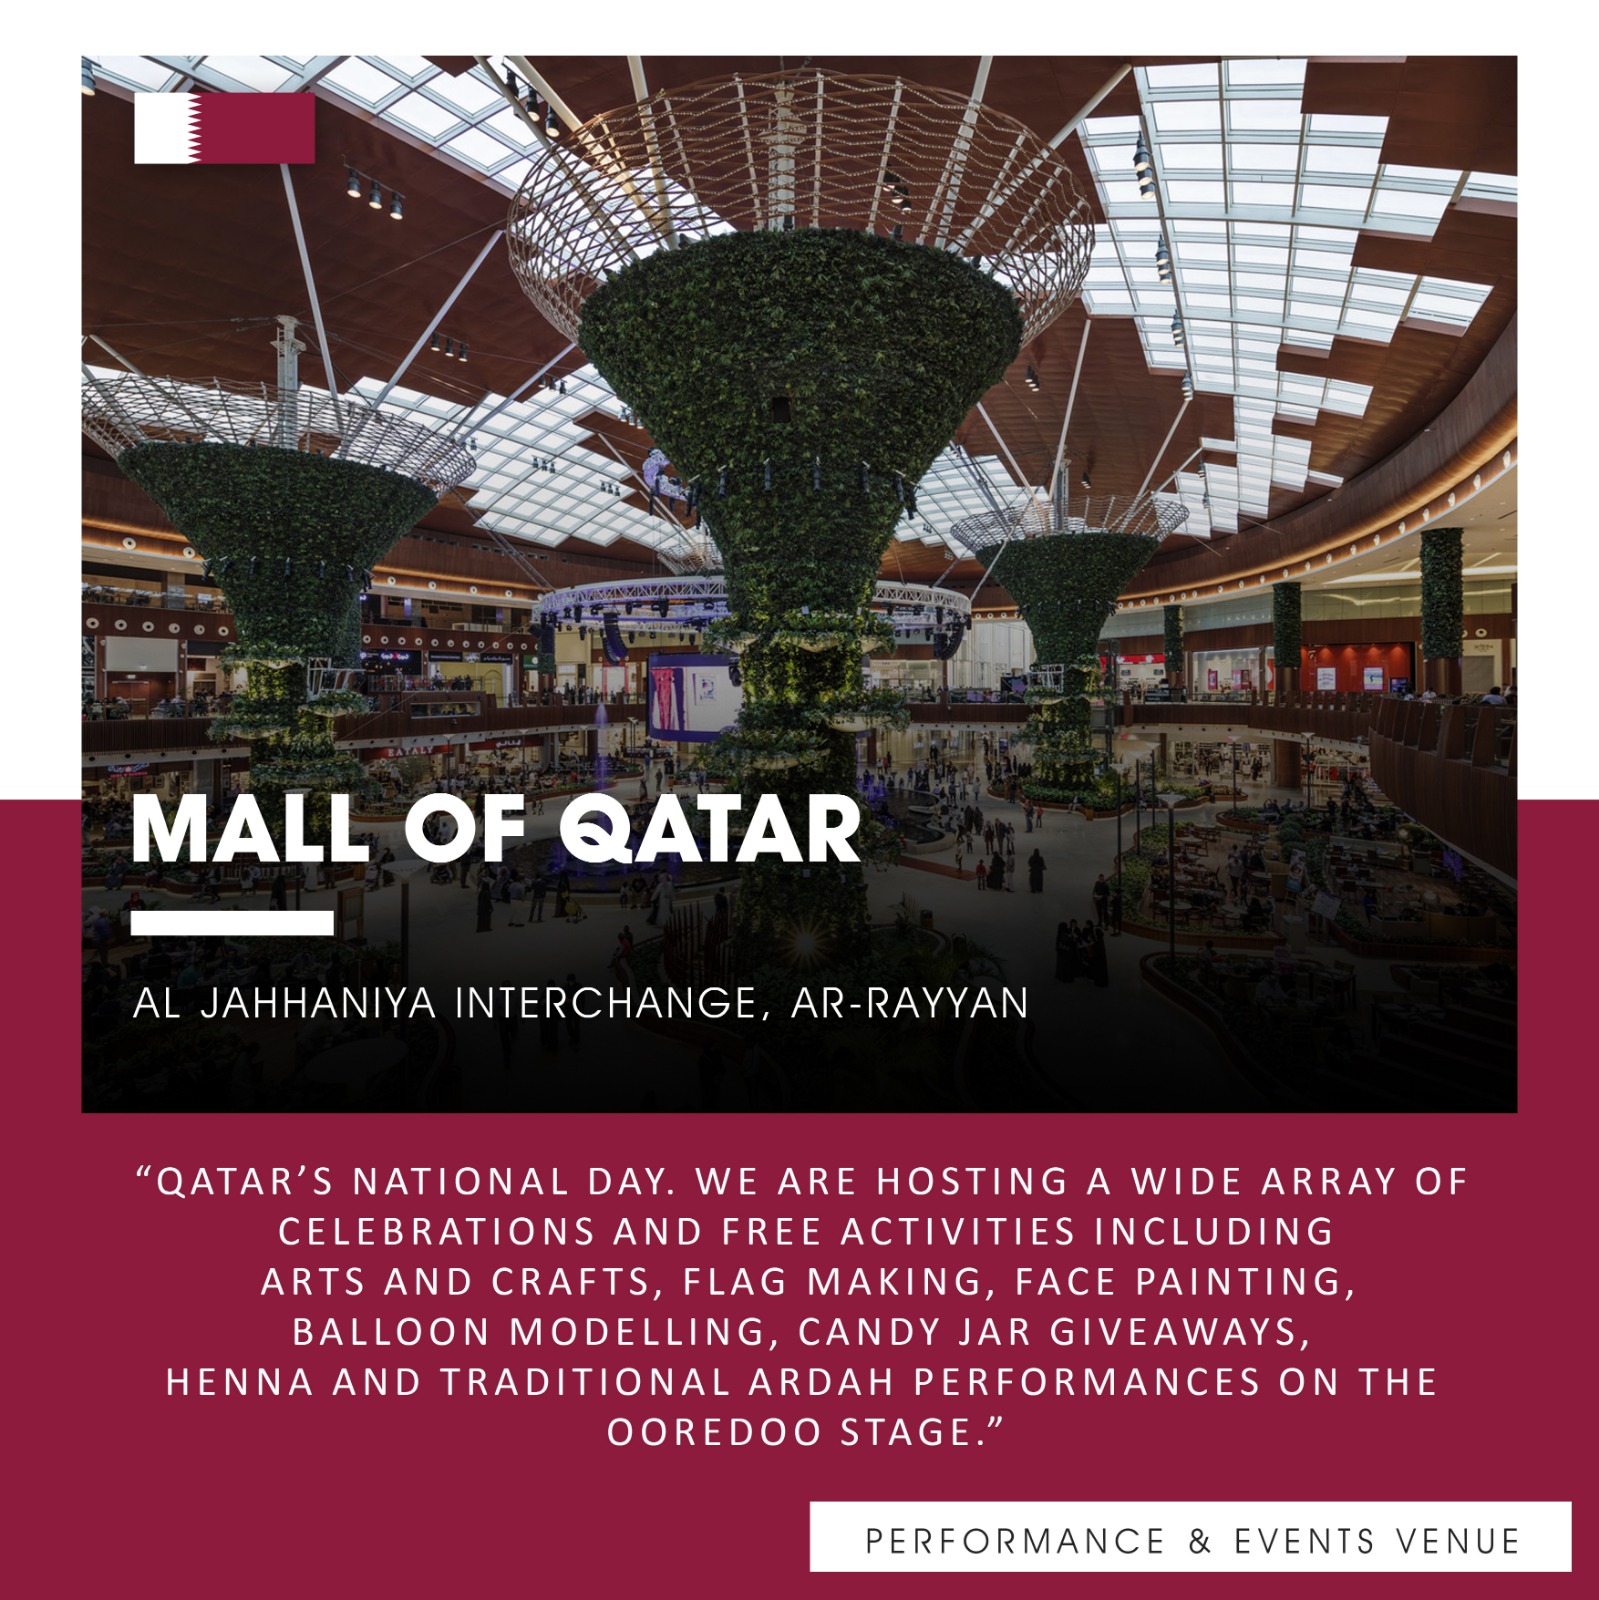 Qatar national day -events & performance